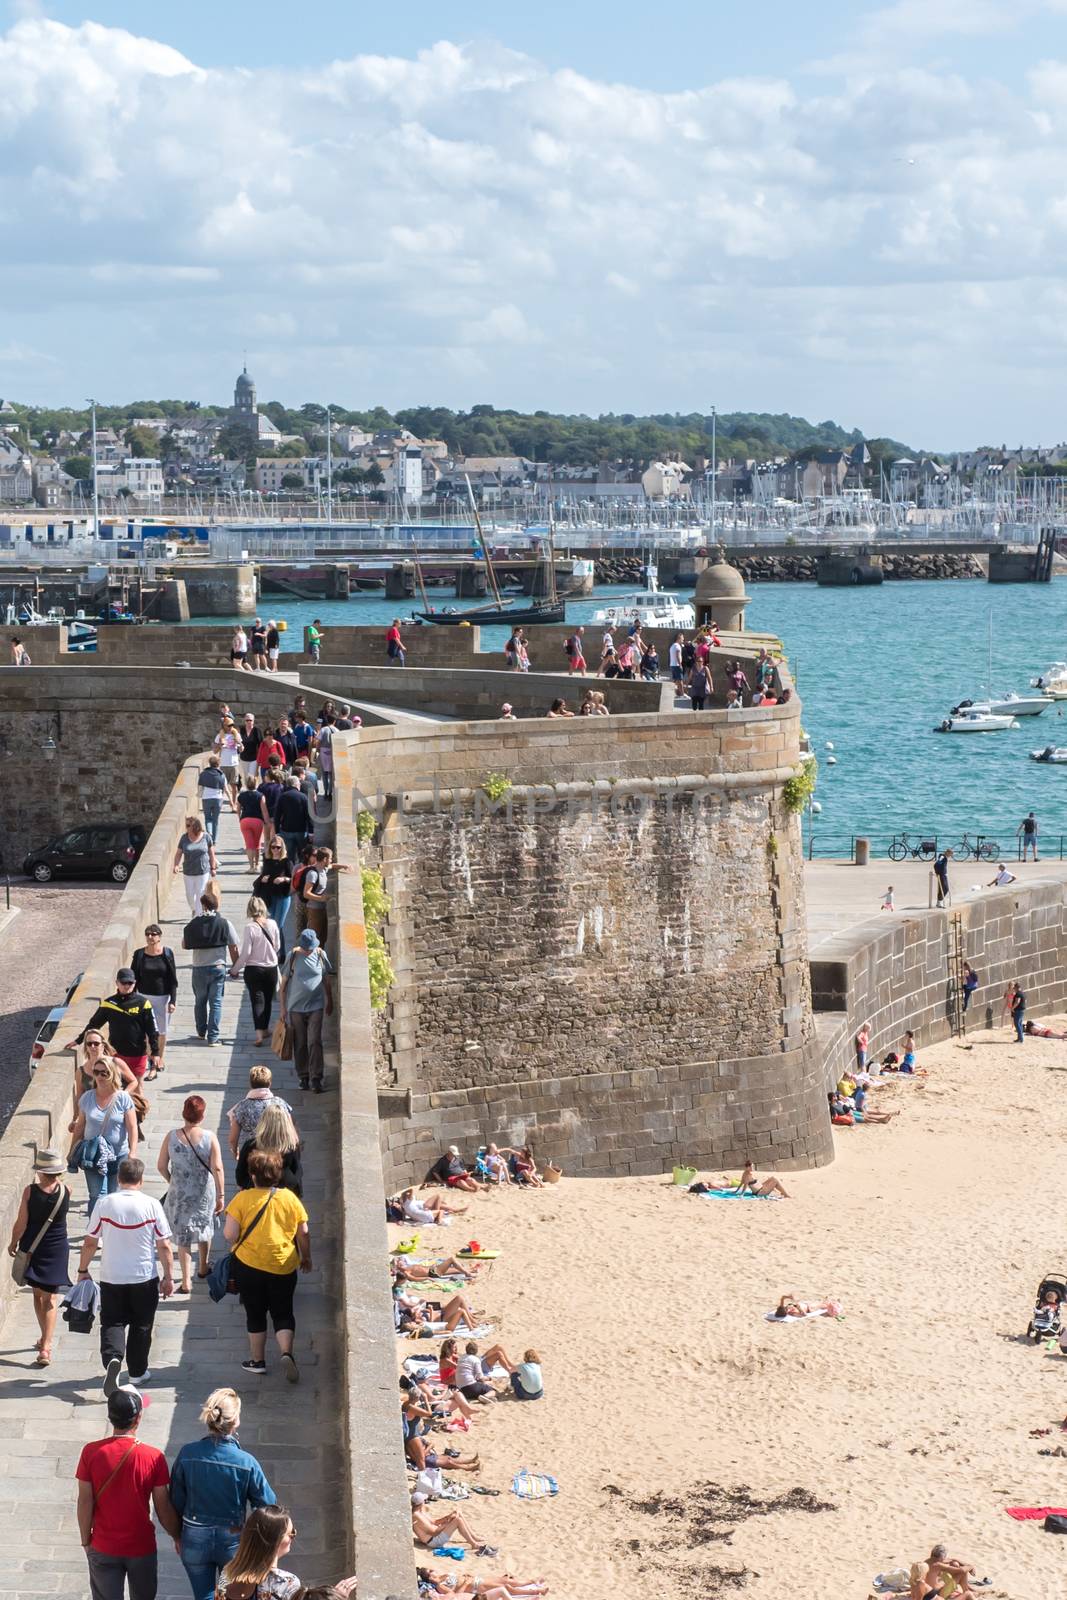 pedestrian path on Fort Saint malo fortification in Saint Malo, France by ontheroadagain